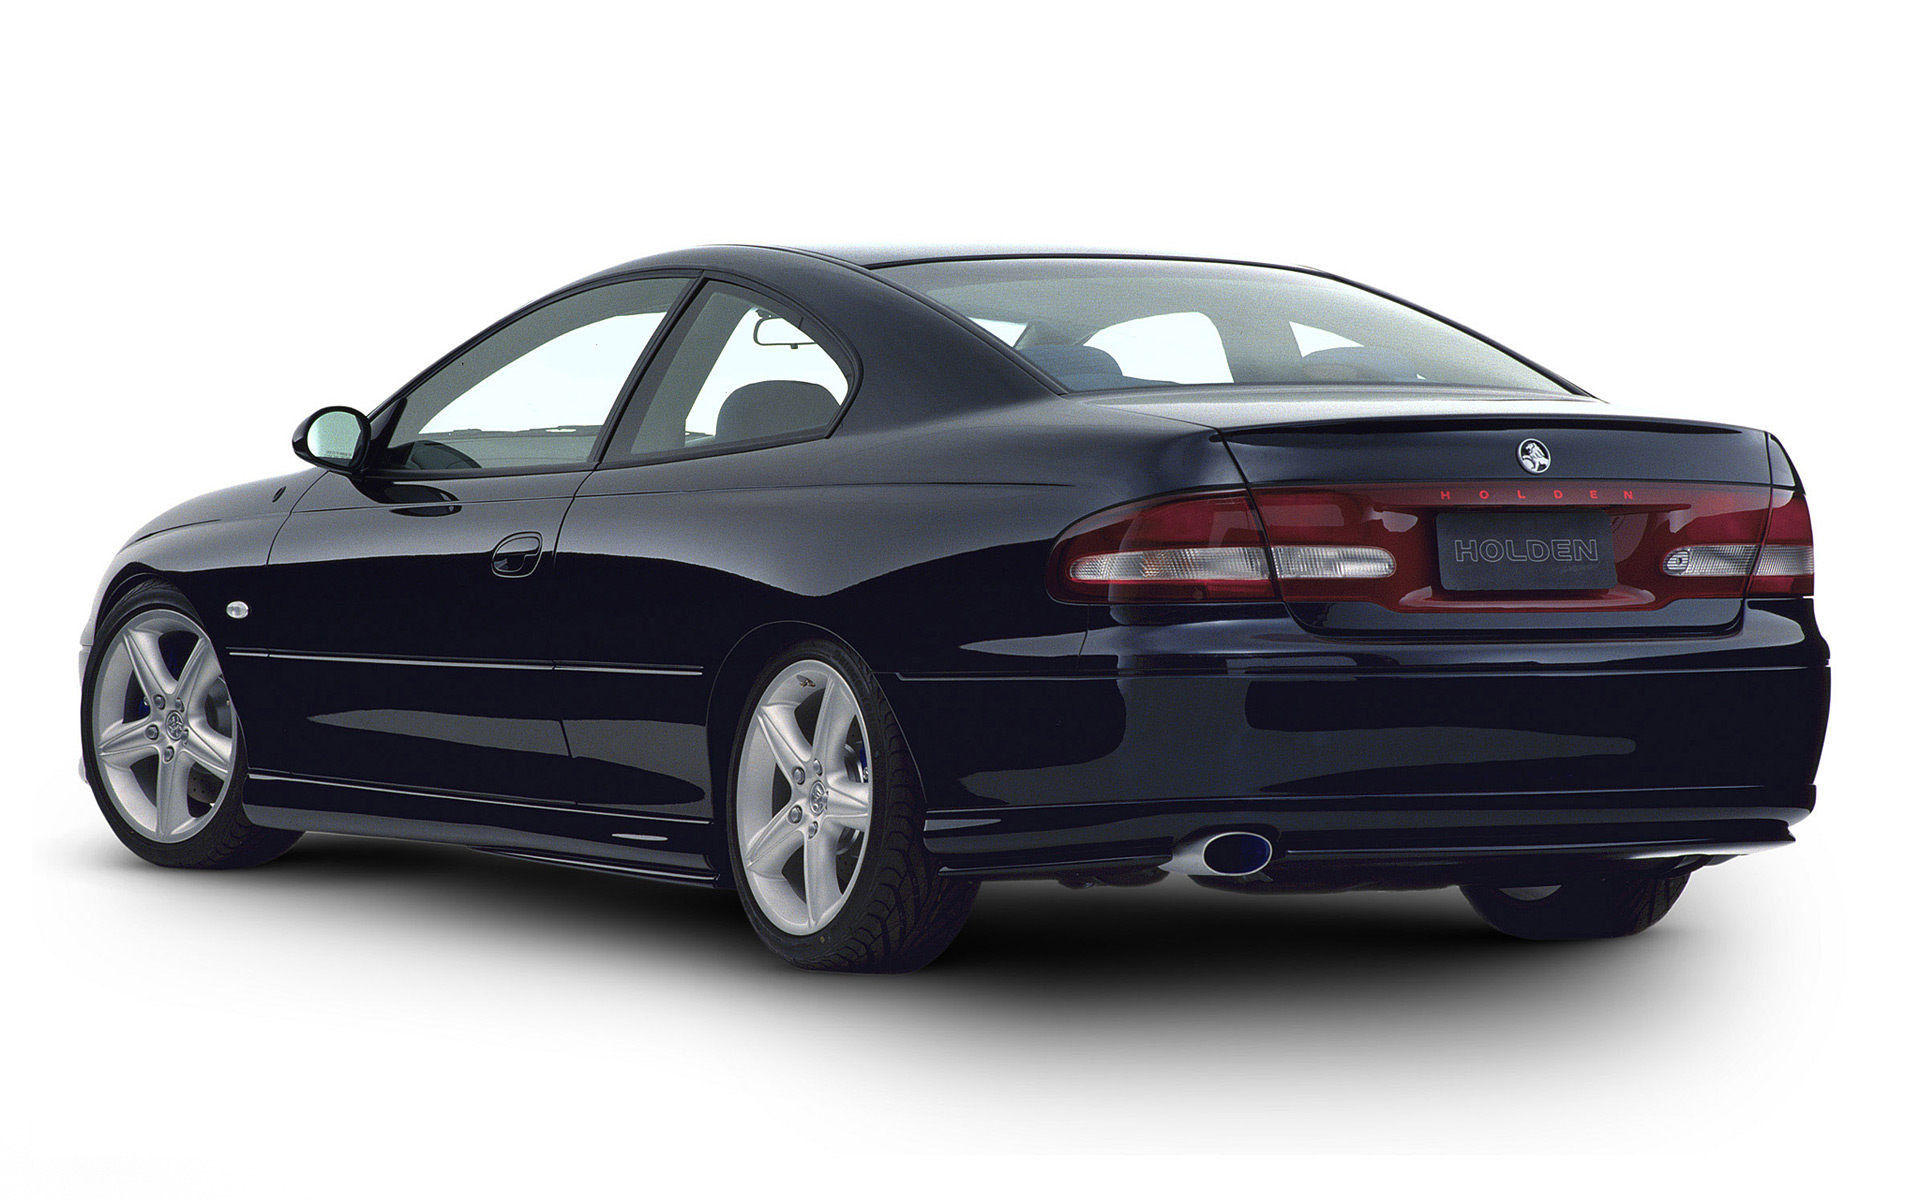  1998 Holden Coupe Concept Wallpaper.